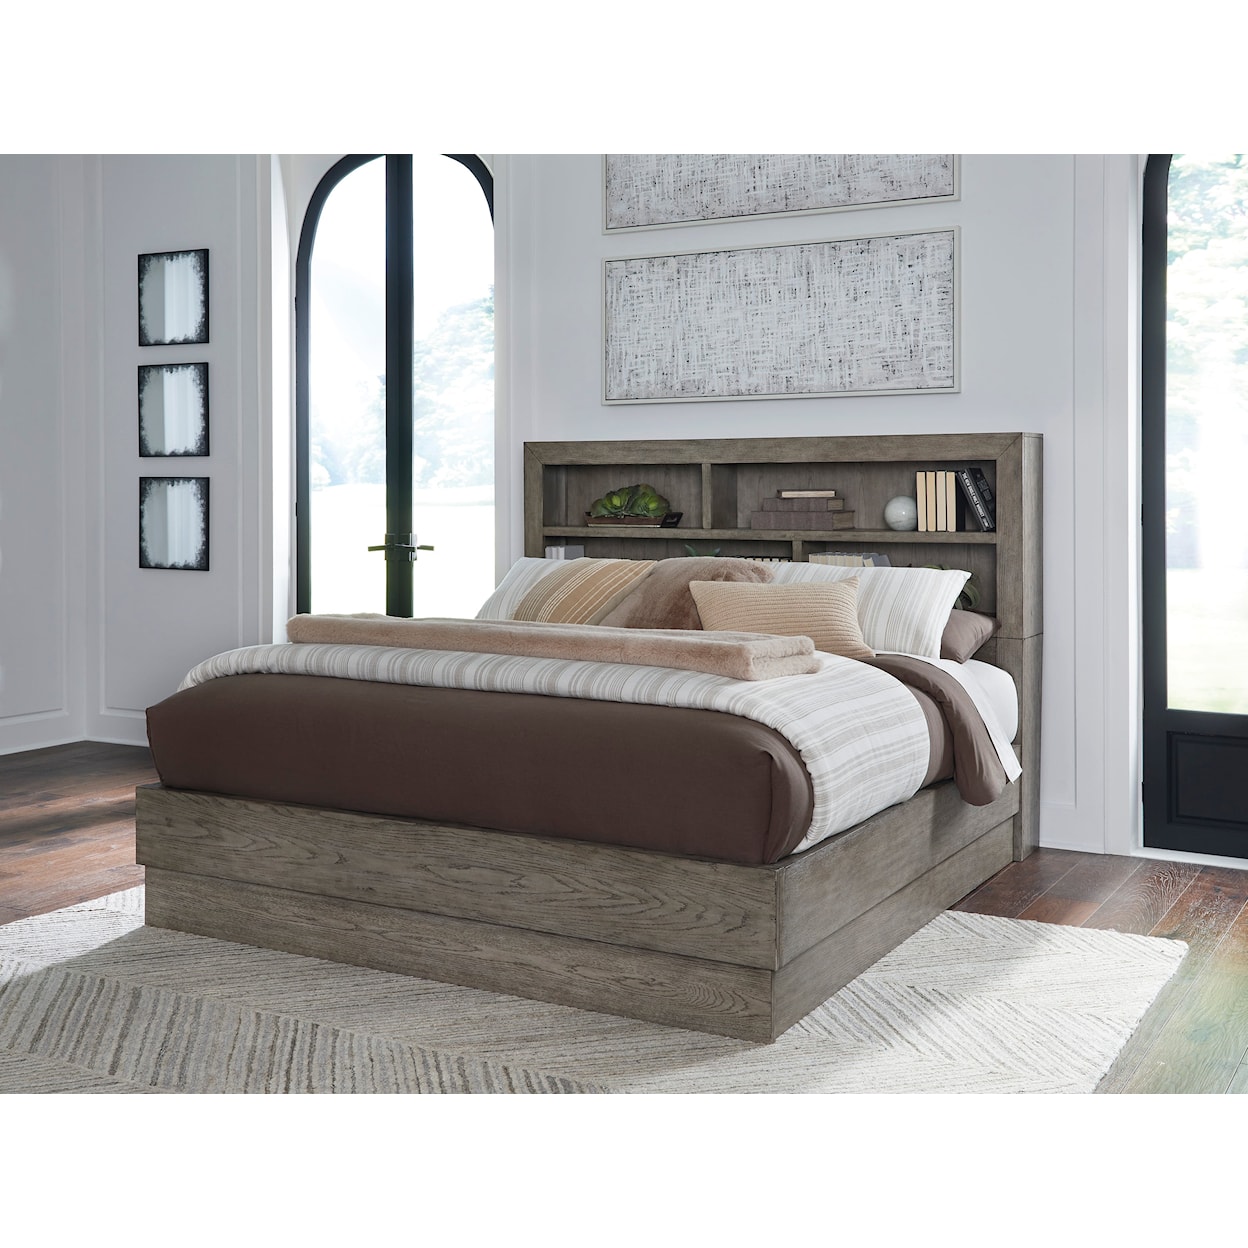 Ashley Furniture Benchcraft Anibecca Queen Bookcase Bed